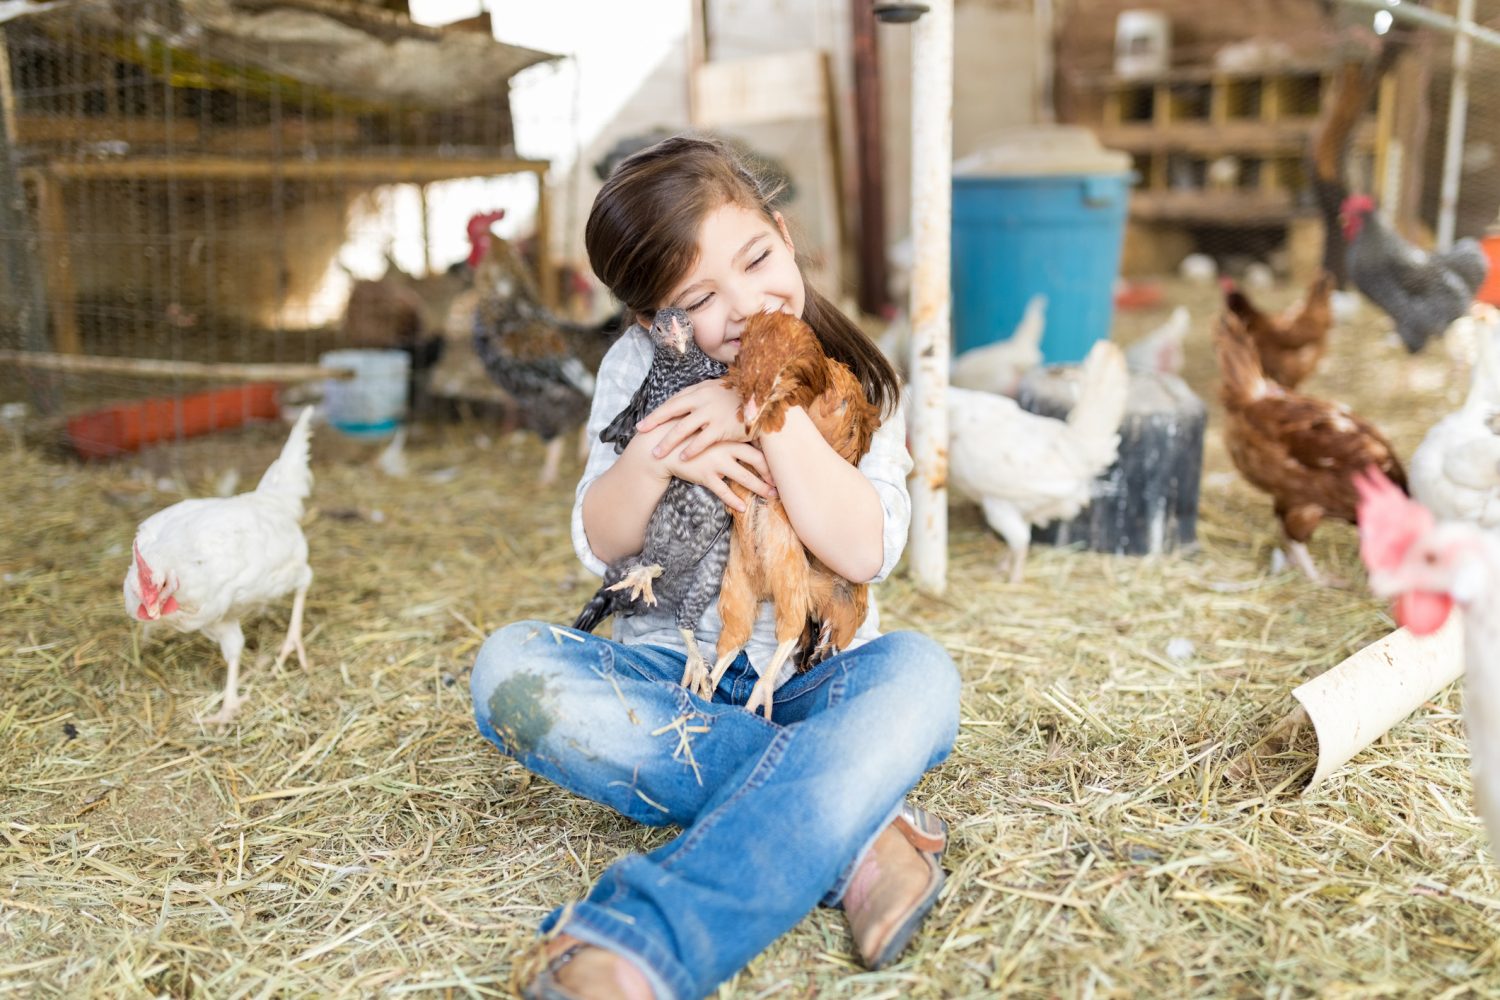 26 Farm Stays Every Family Should Experience